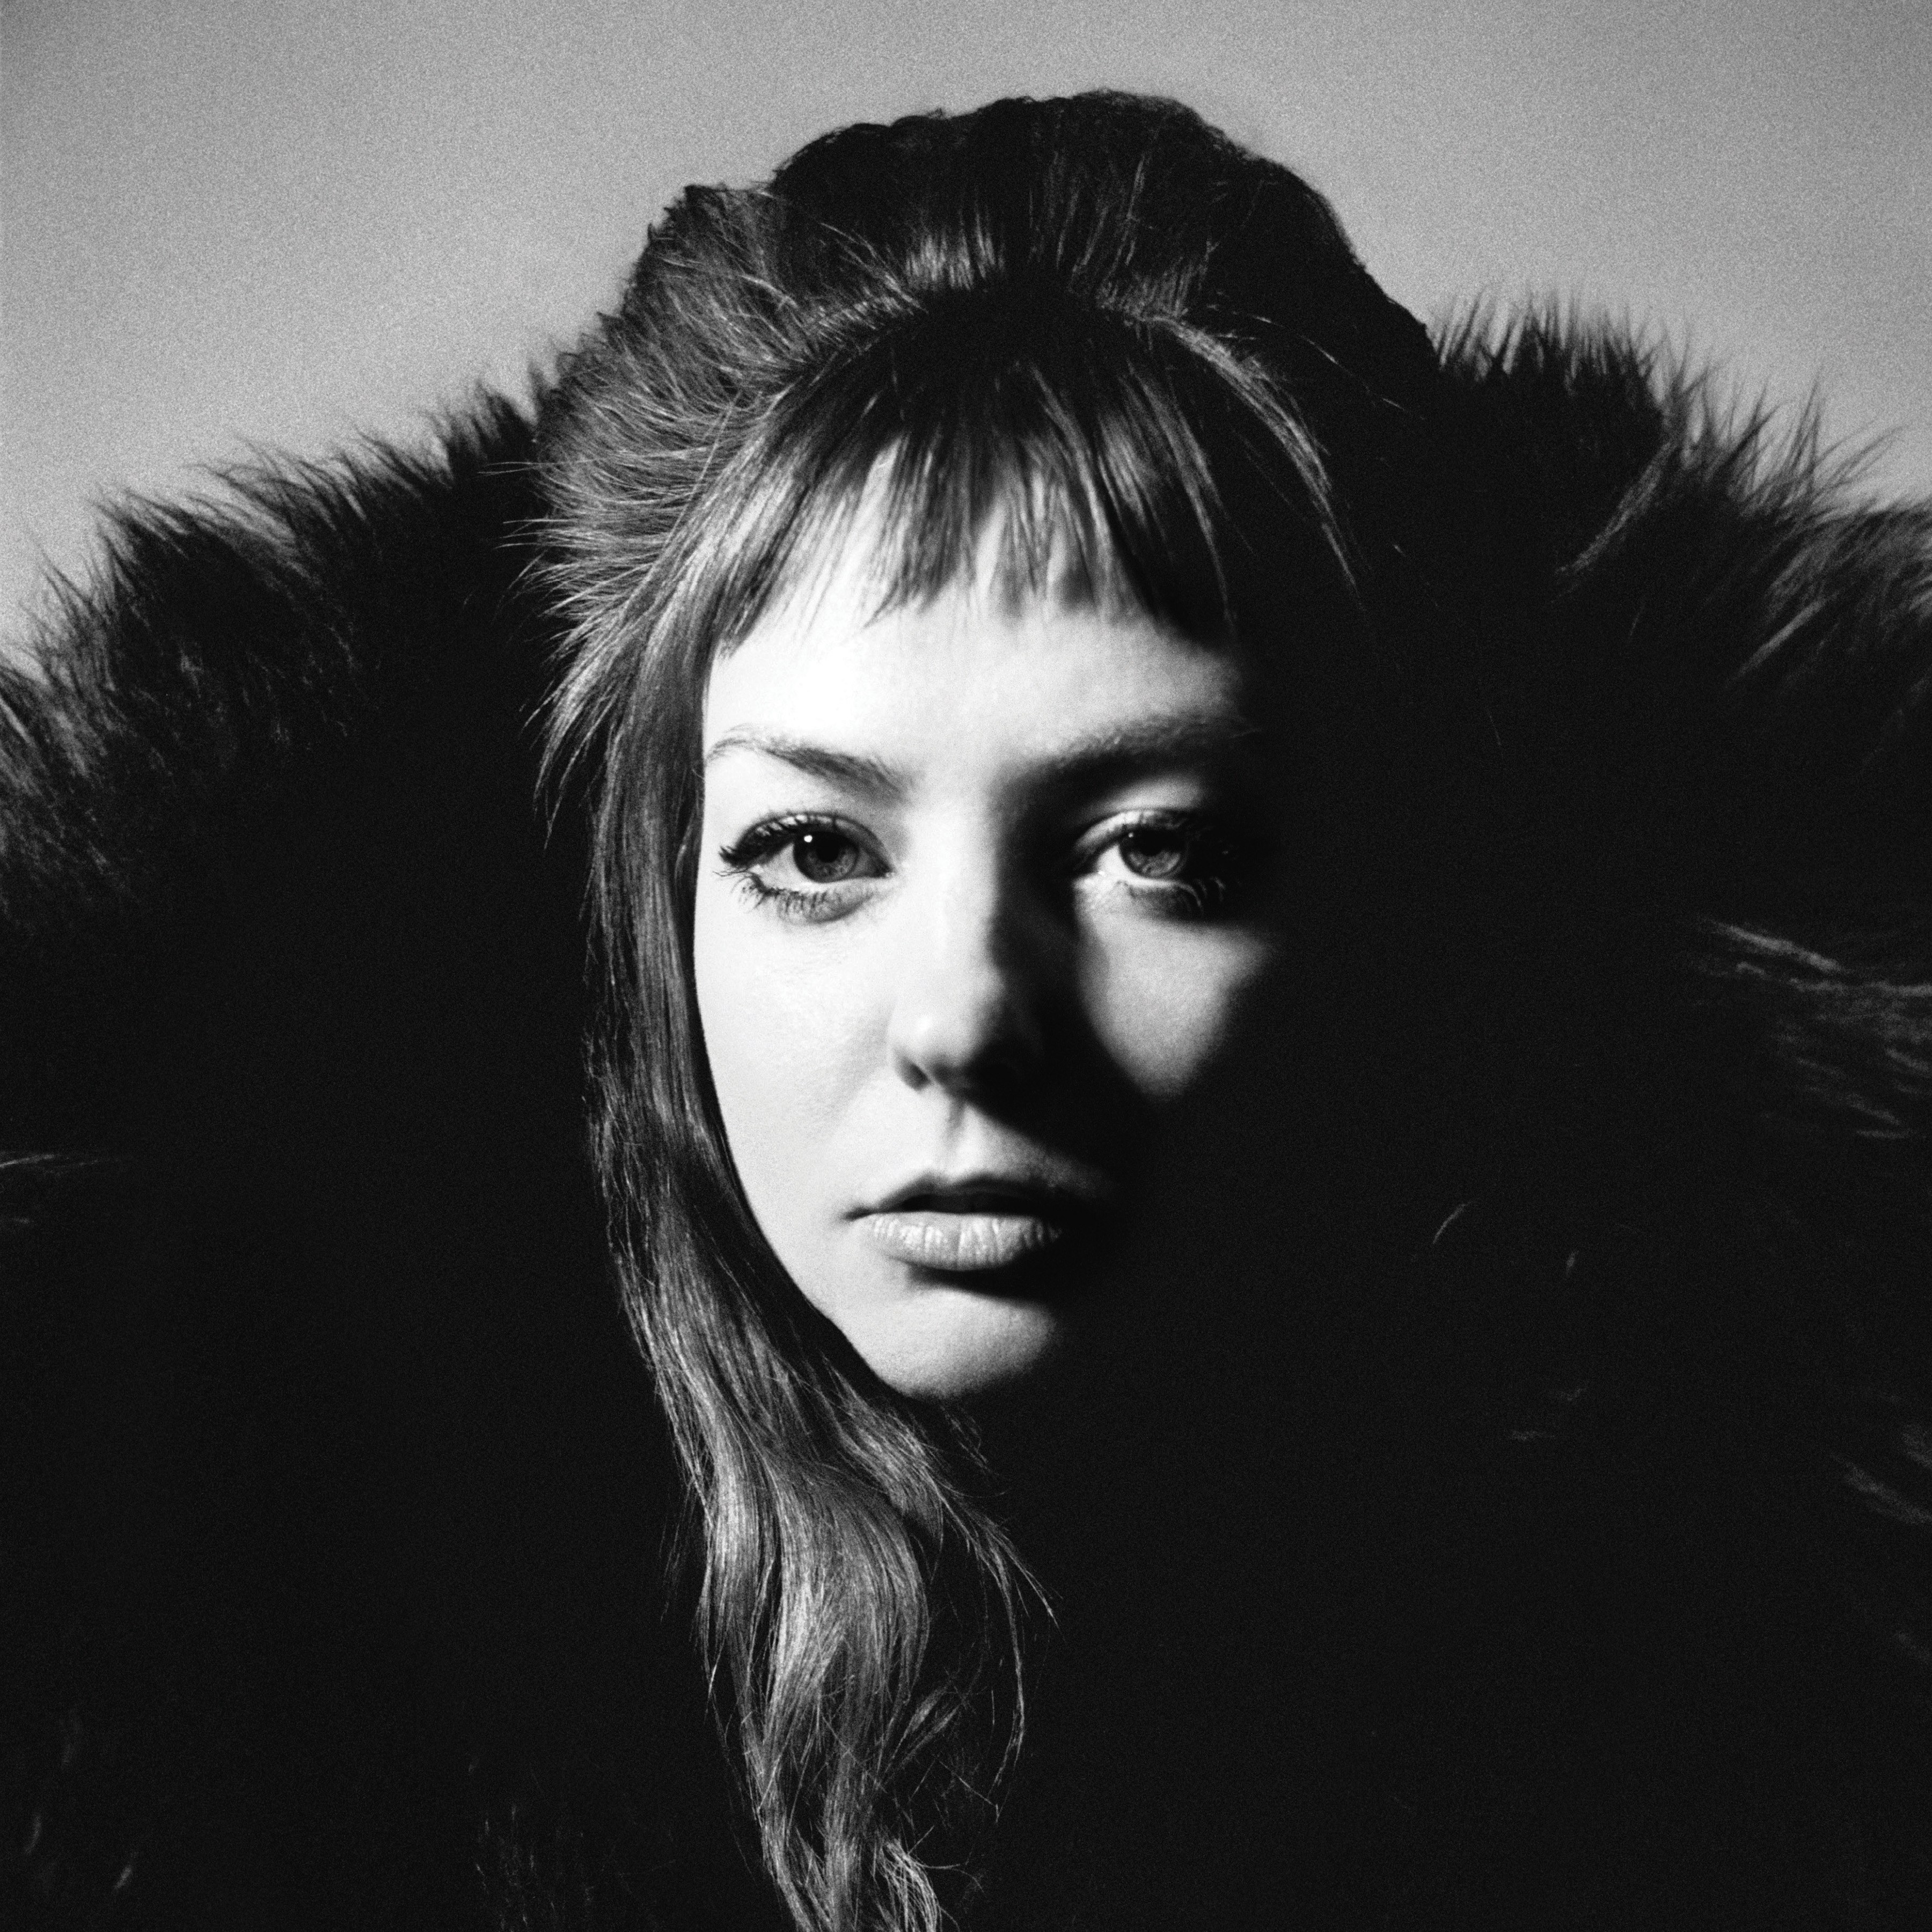 Angel Olsen Announces New Album <i></noscript>All Mirrors</i>, Releases Video for Title Track” title=”All Mirrors” data-original-id=”336787″ data-adjusted-id=”336787″ class=”sm_size_full_width sm_alignment_center ” data-image-use=”multiple_use” />
</p> </div>
</div>
</div>
</div>
</div>
</div>
</div>
</section>
<section data-particle_enable=